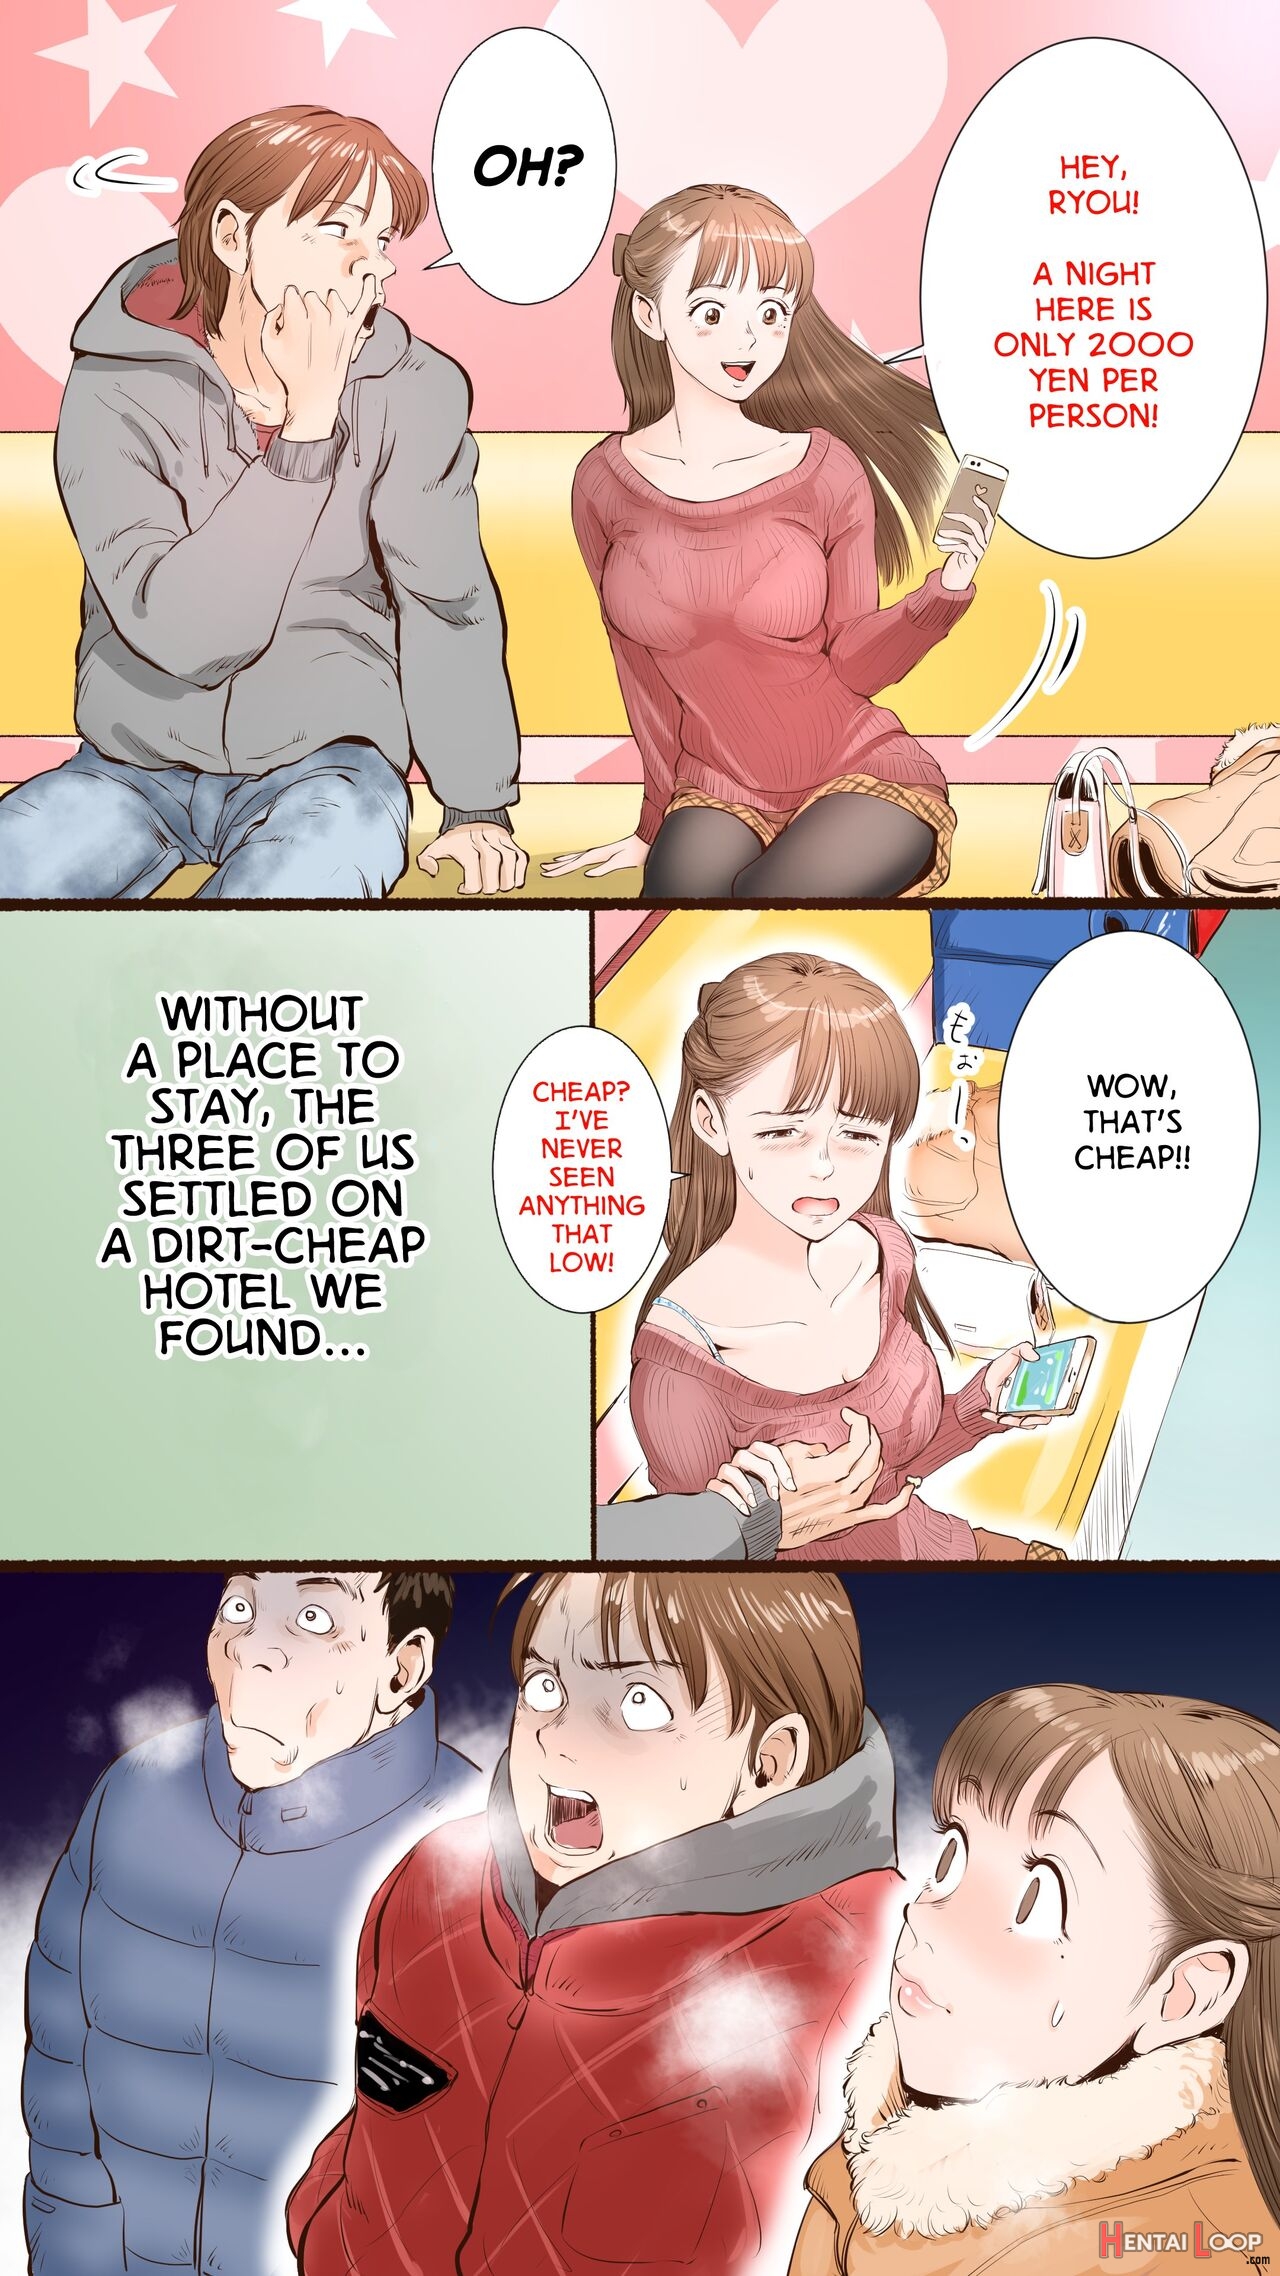 Hot Spring Inn Story page 3